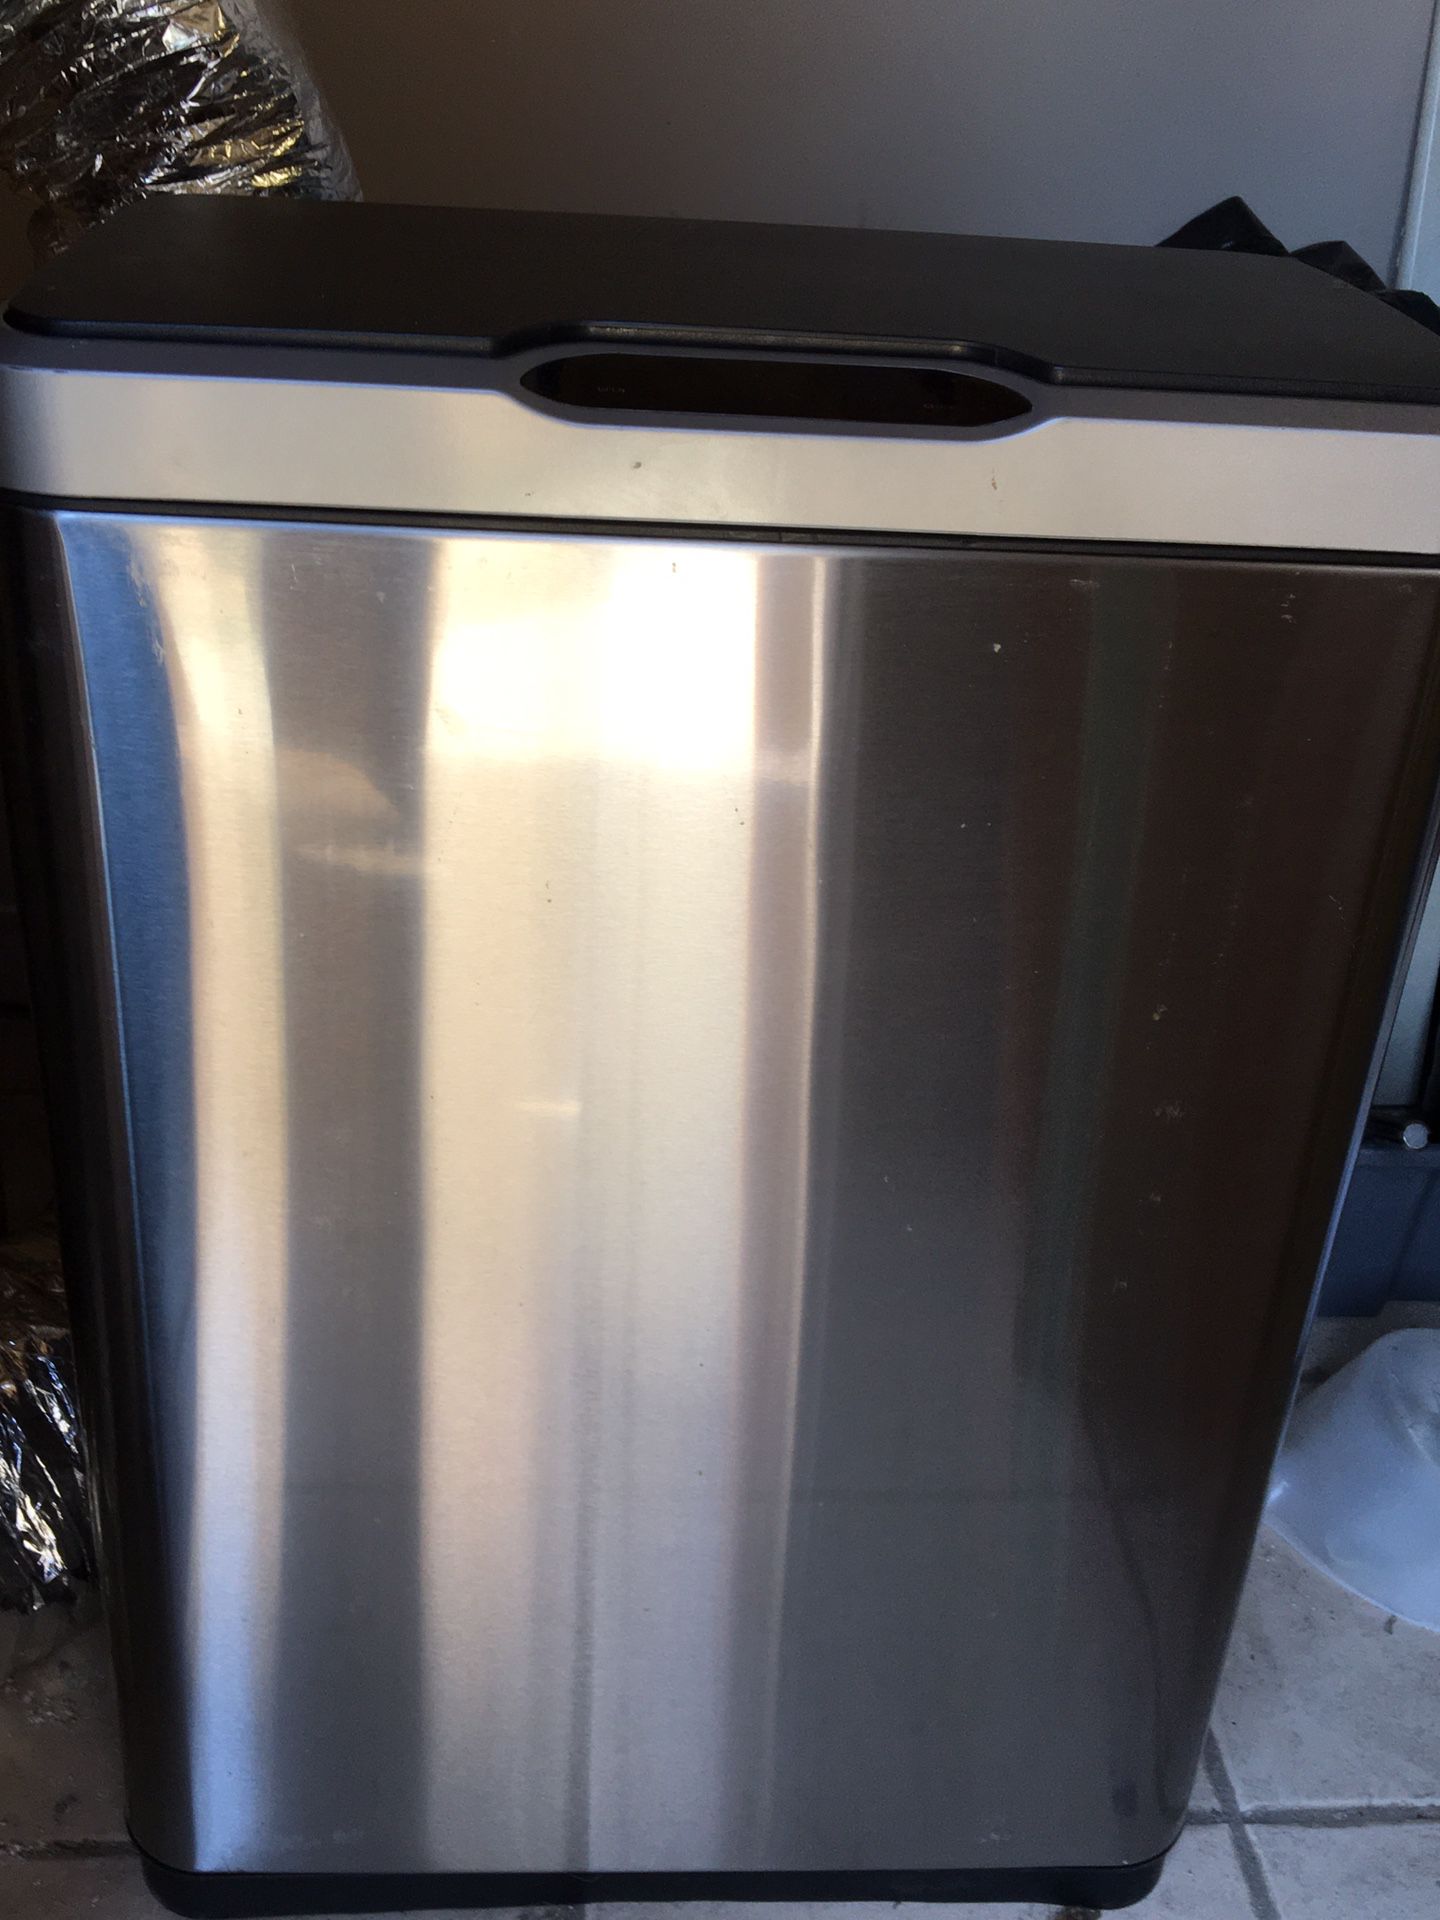 Stainless steel kitchen trash can